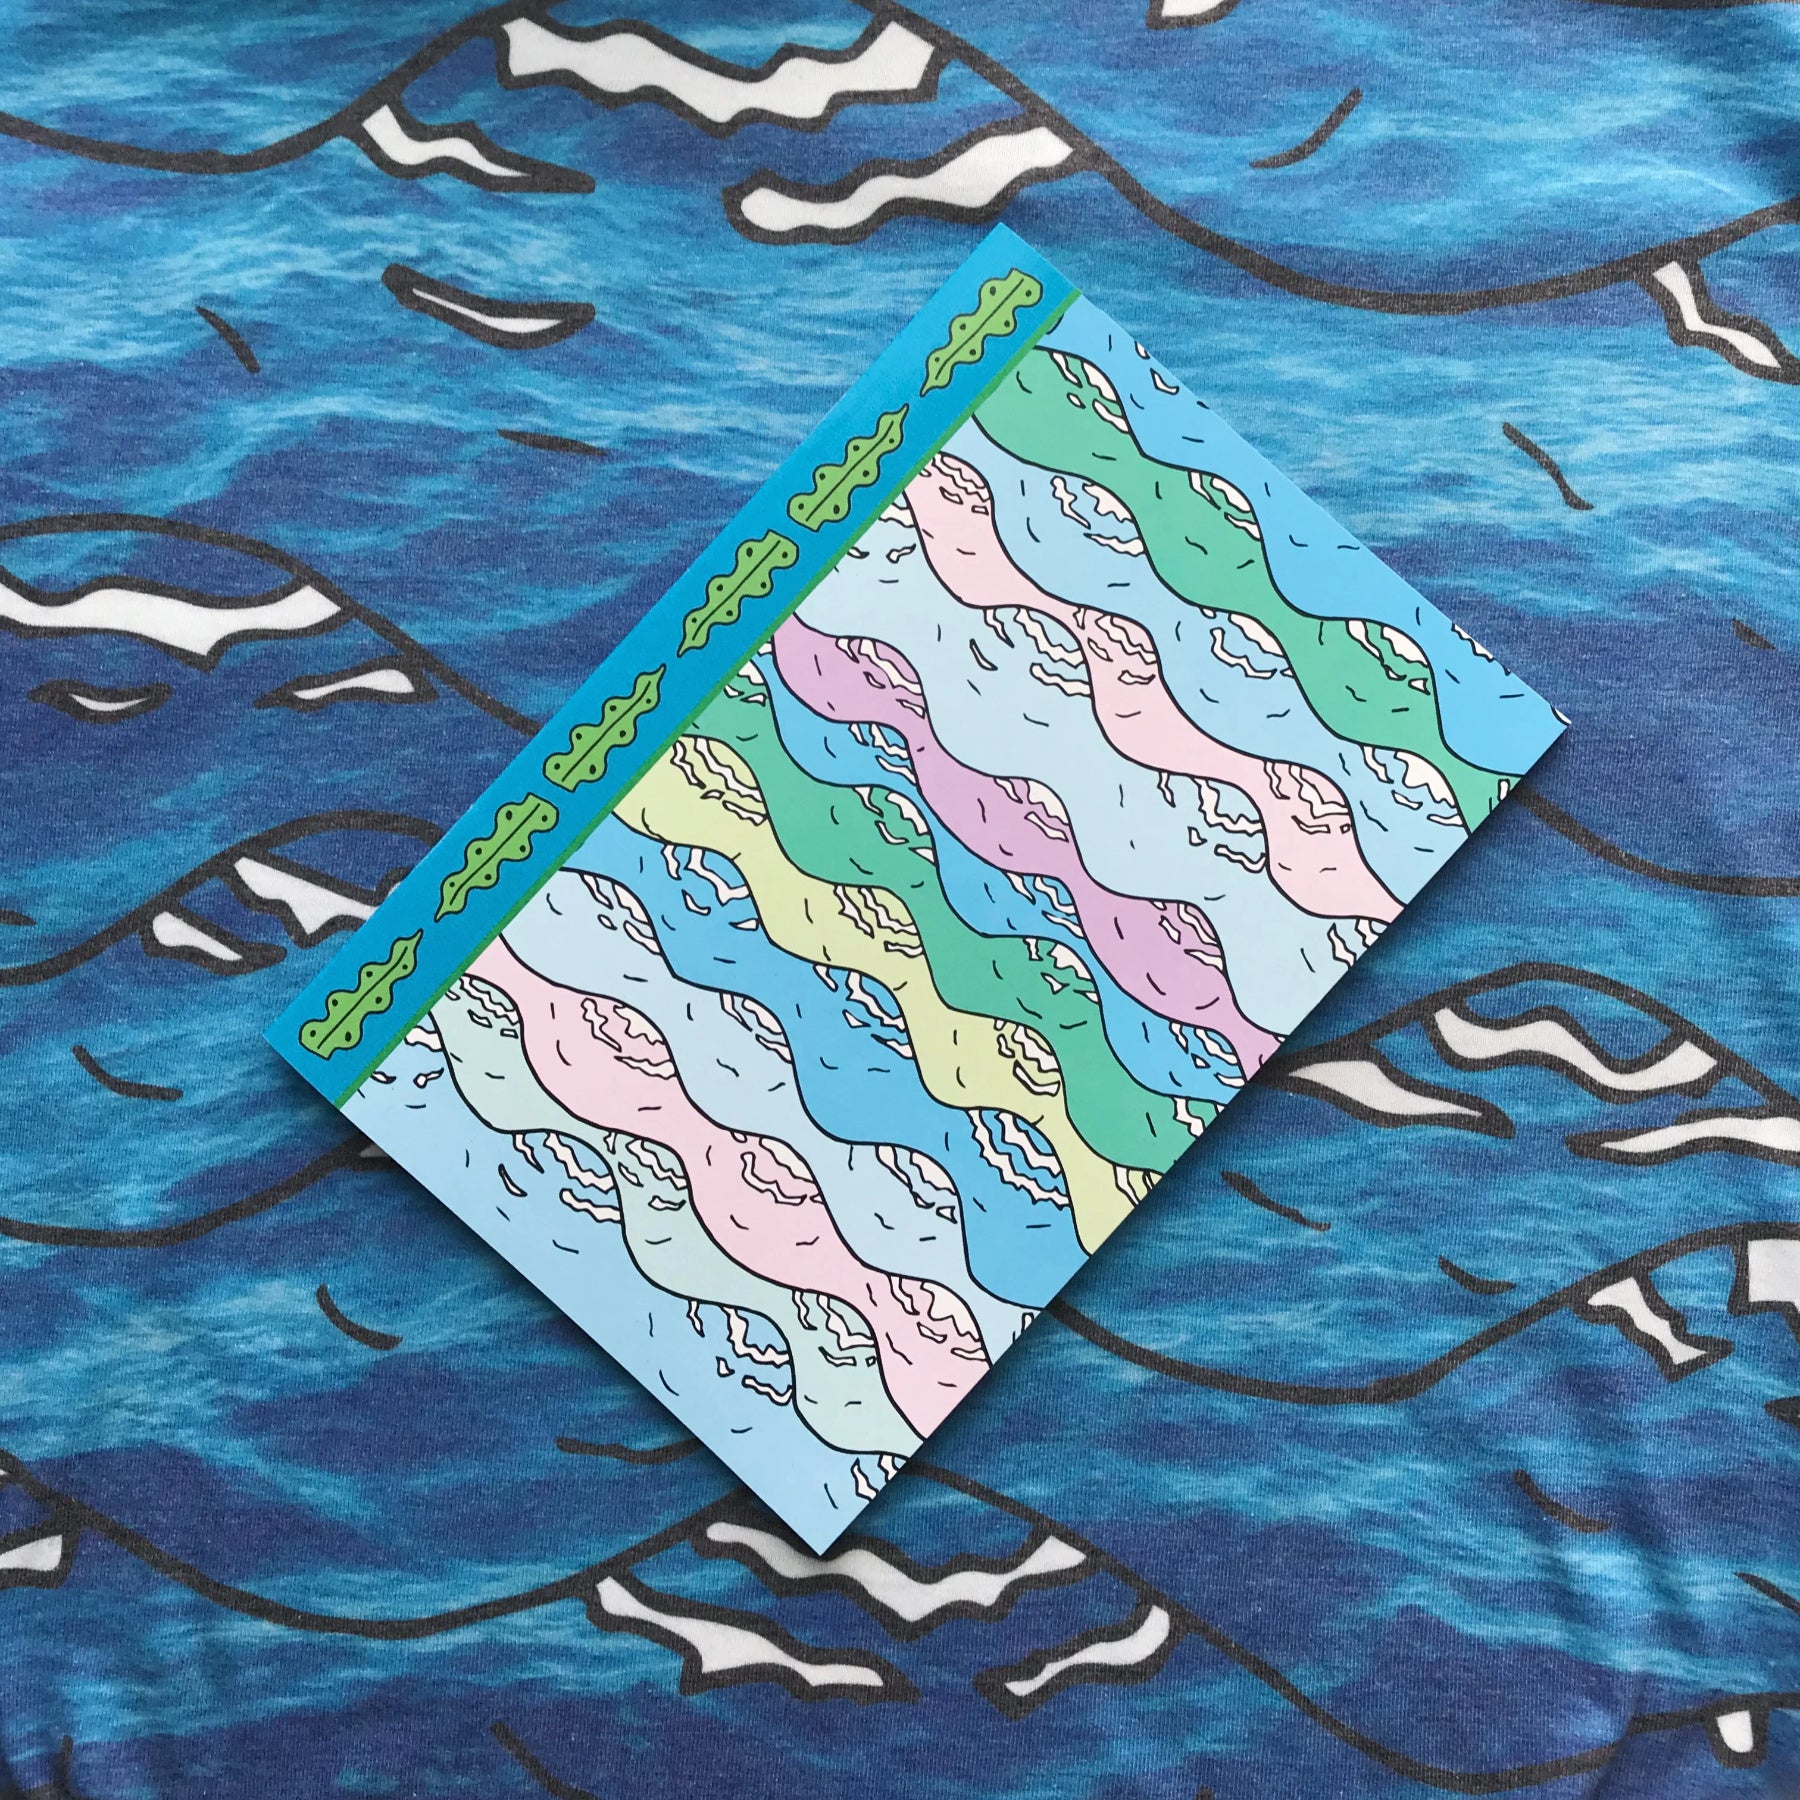 Merpola A5 Notebook 'Let Me Sea Your Doodle' featuring pastel wave illustration design and seaweed boardar